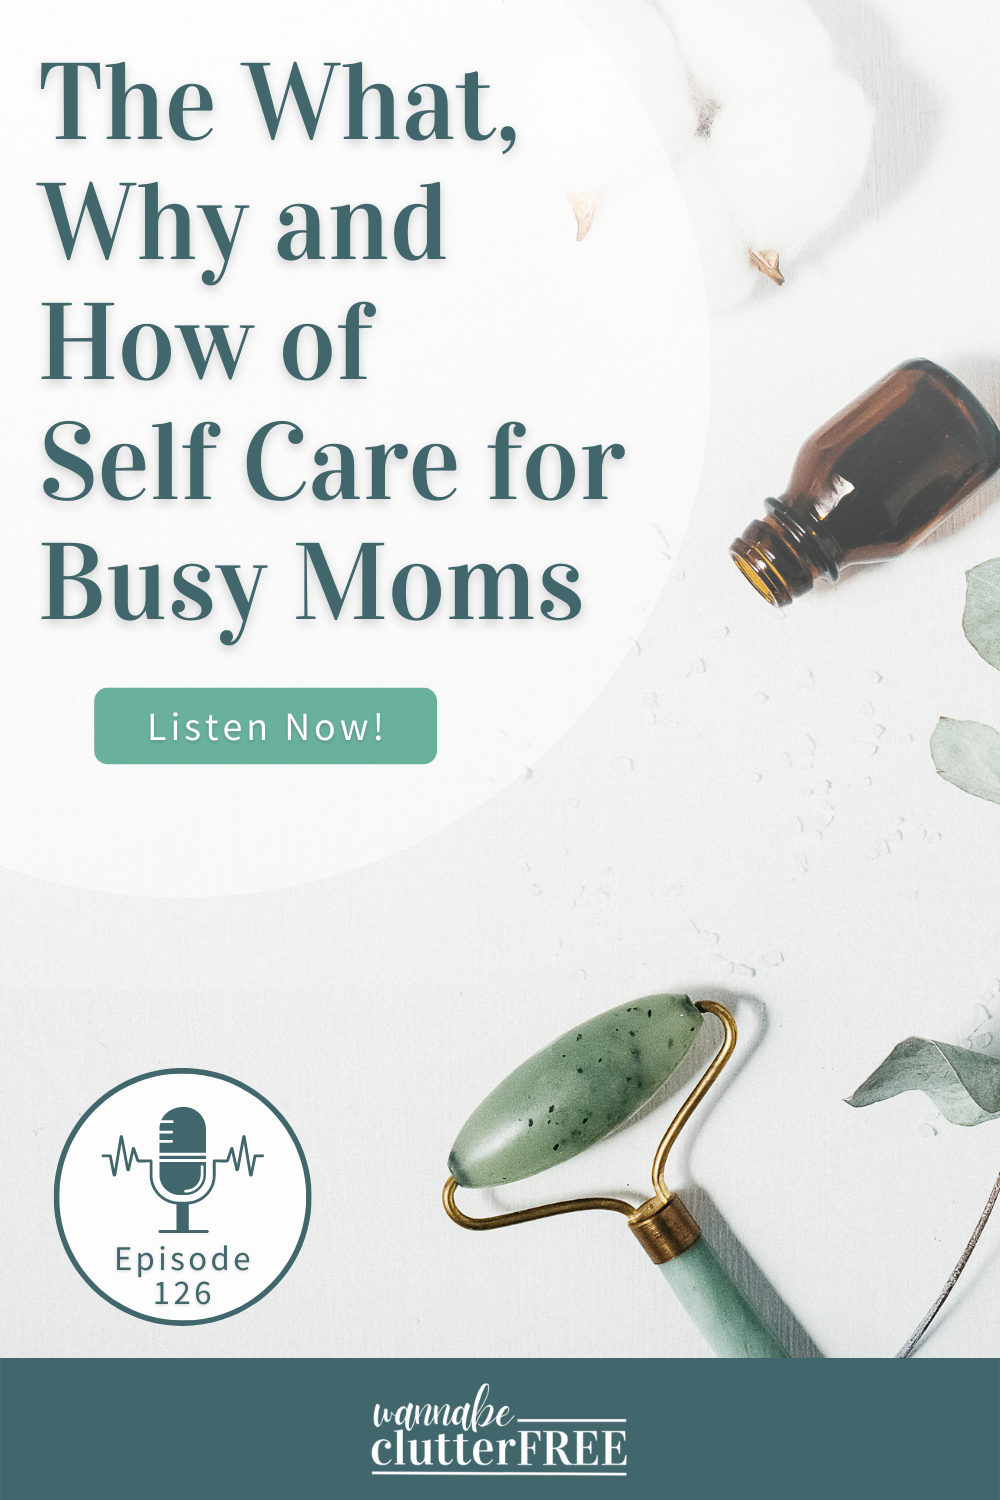 The What, Why, and How of Self Care for Busy Moms